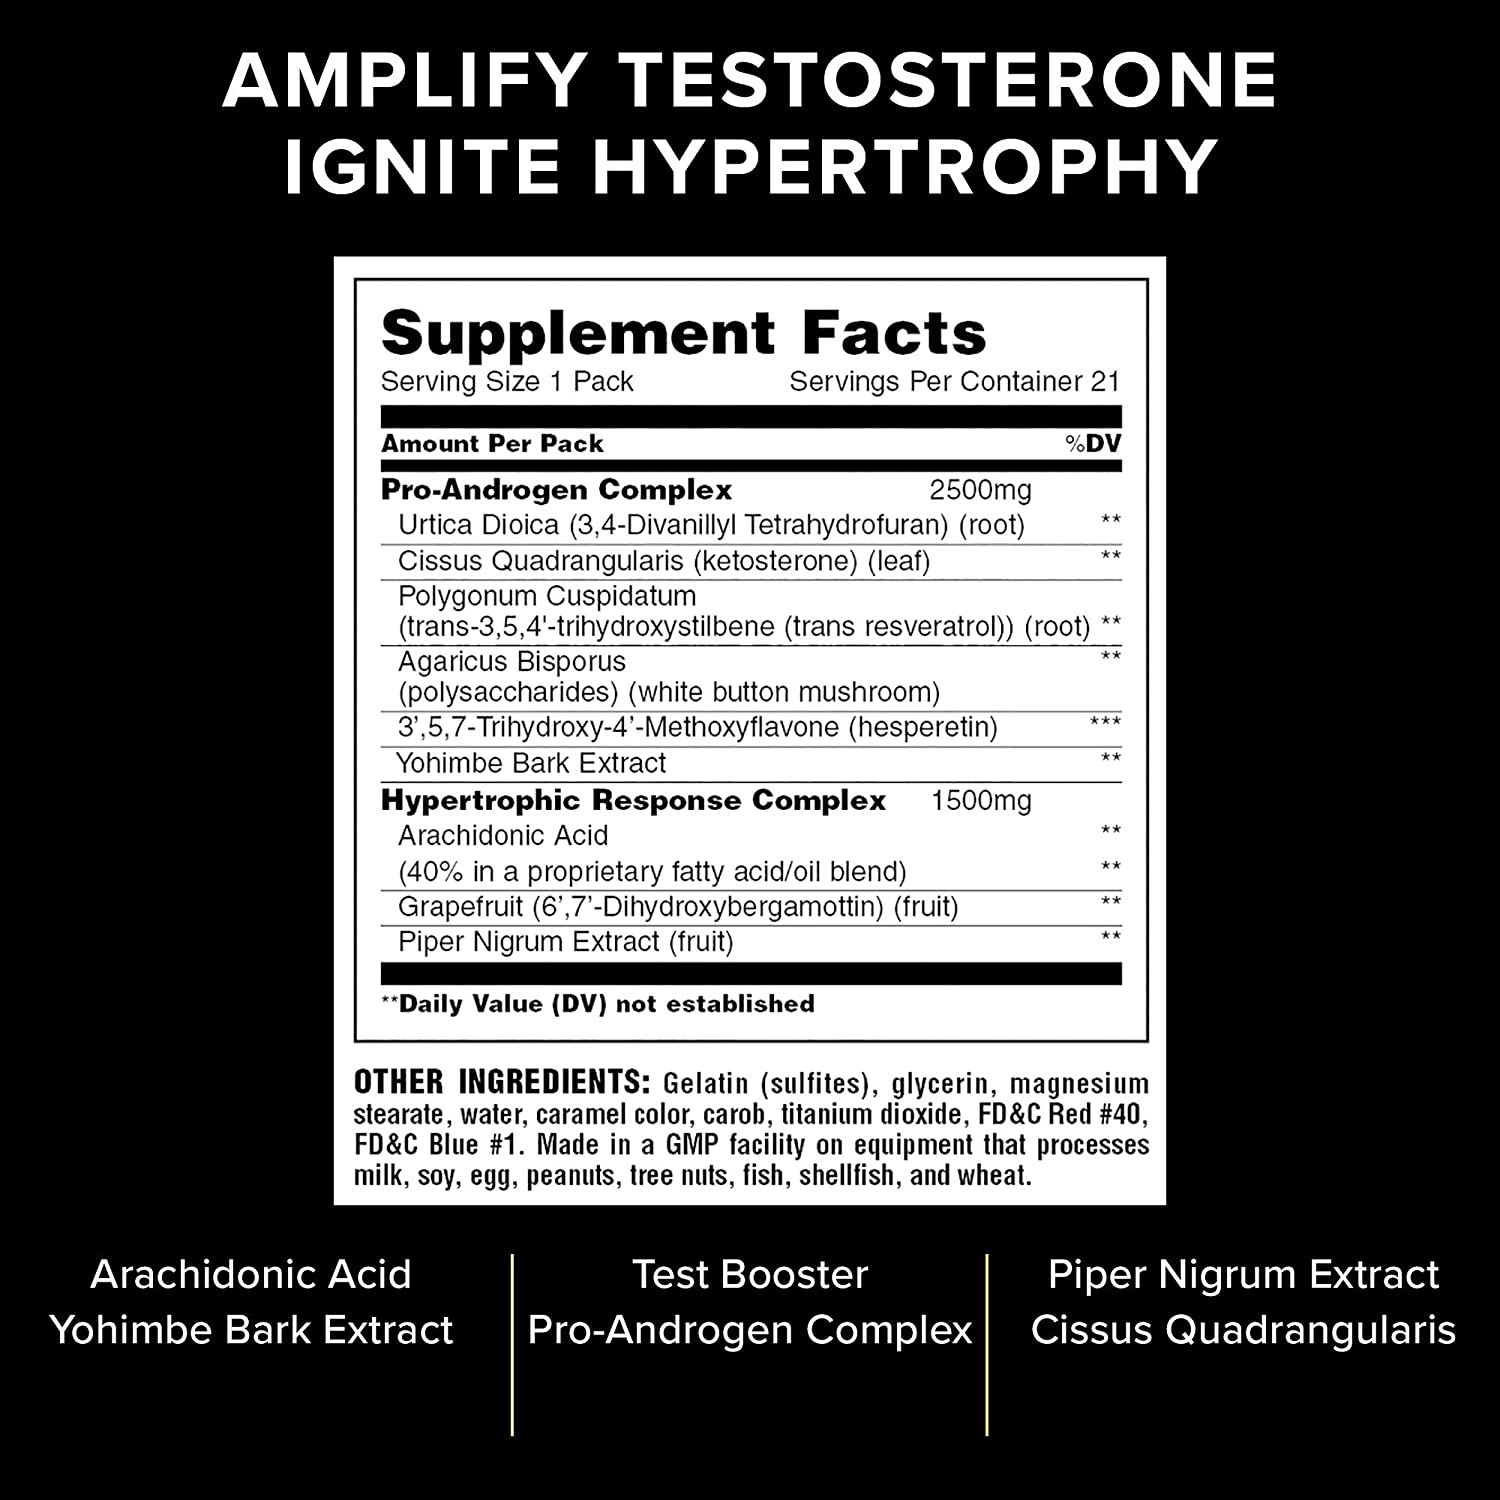 Animal test ingredients and supplement facts